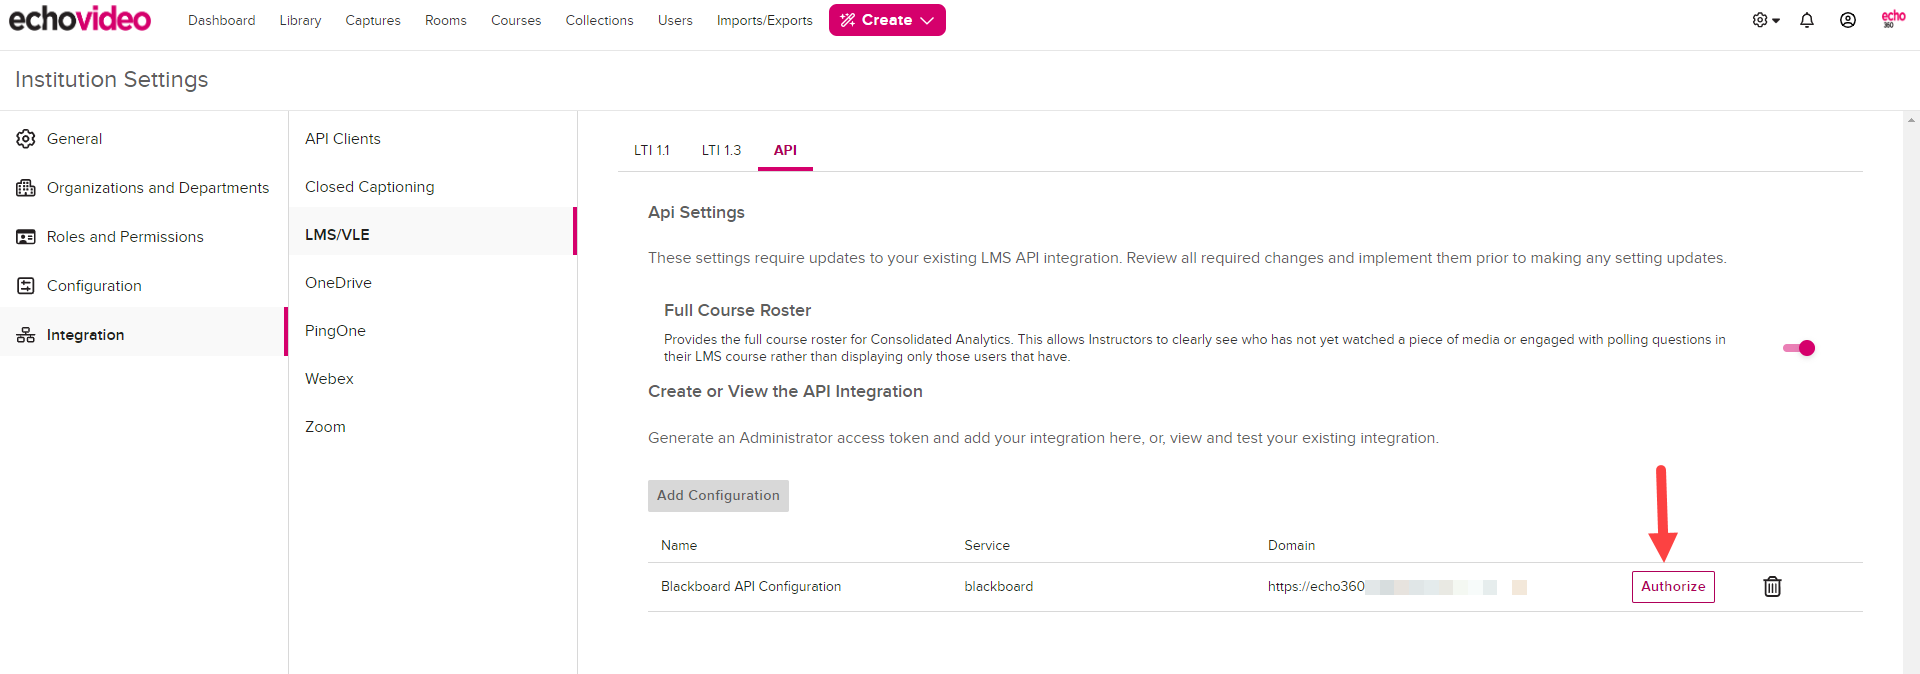 LMS API page in Echo360 with new API configuration showing including Authorize button for steps as described